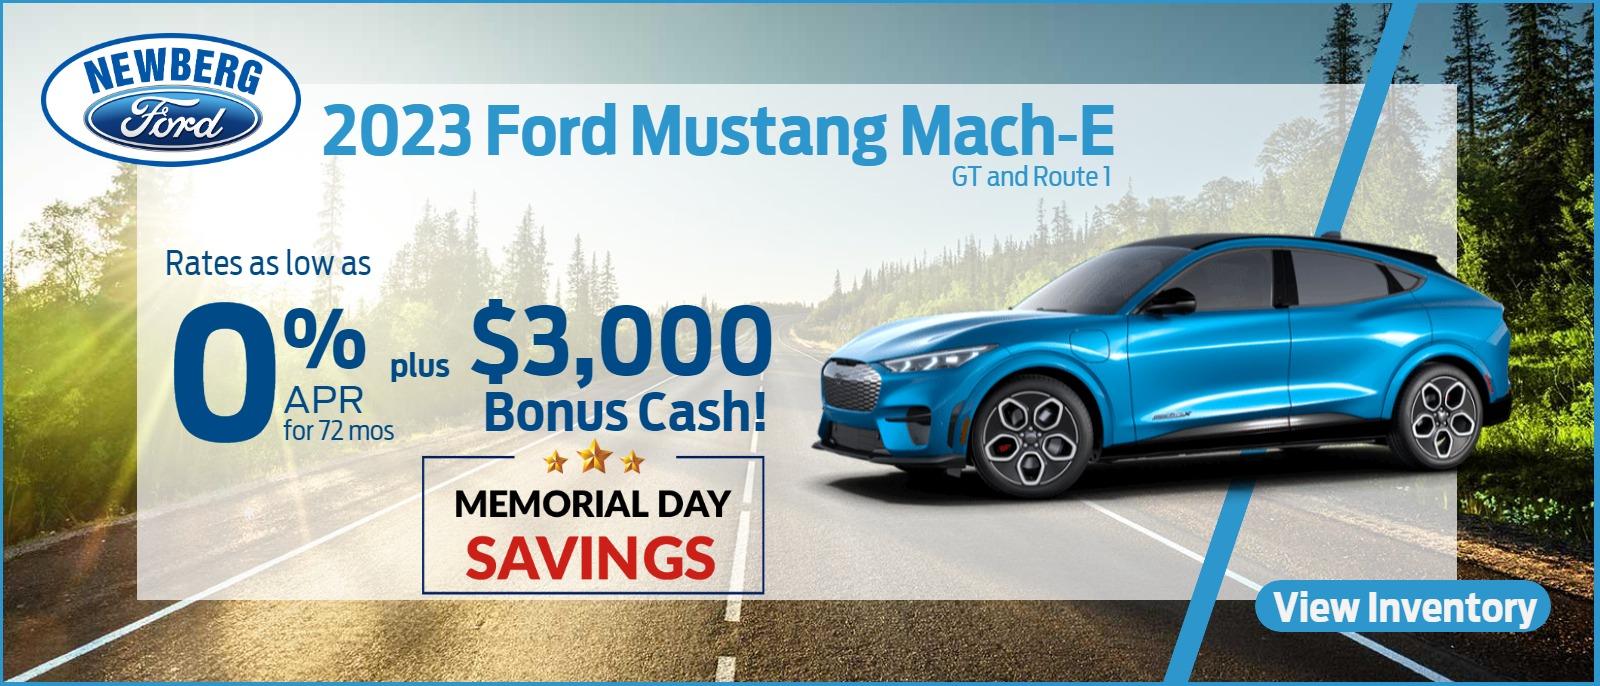 0% APR FOR UP TO 72 MONTHS PLUS $3,000 BONUS CASH ON NEW 2023 MUSTANG MACH-E FROM NEWBERG FORD